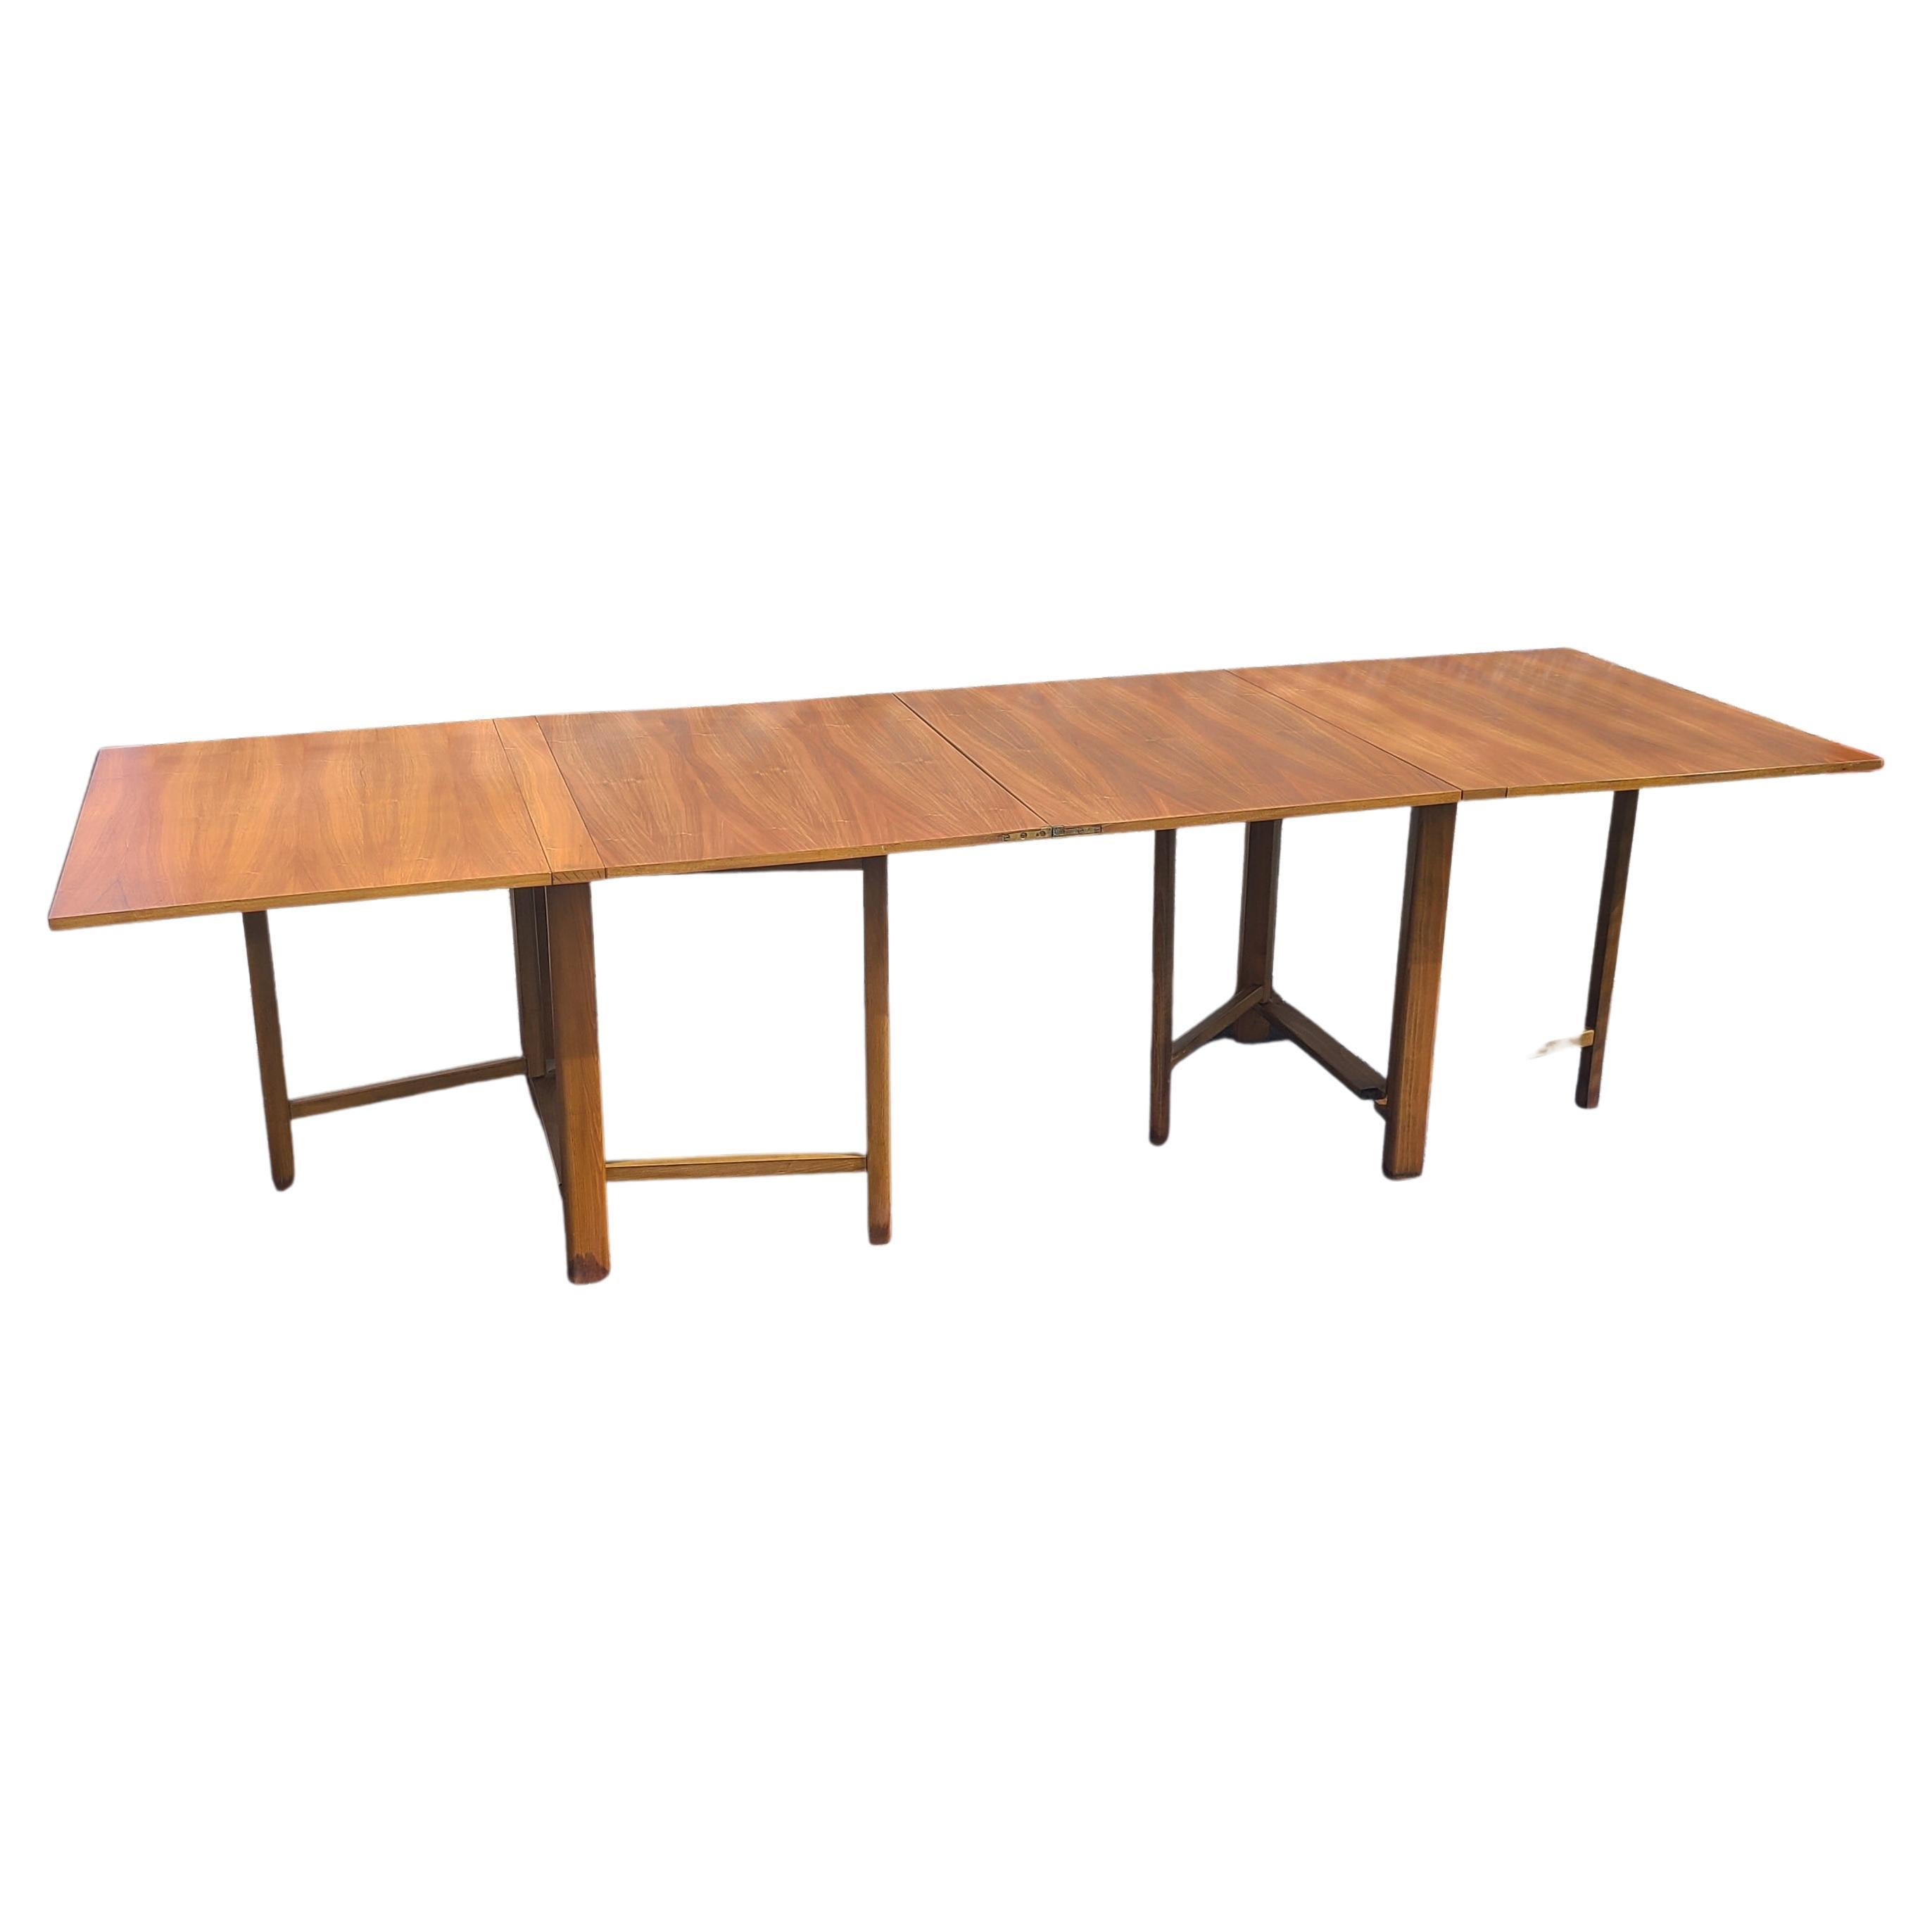 Please message us for a cost effective shipping quote to your location.

Mid Century Modern Folding Dining Table. Nice optional features of small dining to large seating capacity. Walnut book matched veneer surface. Beechwood legs.